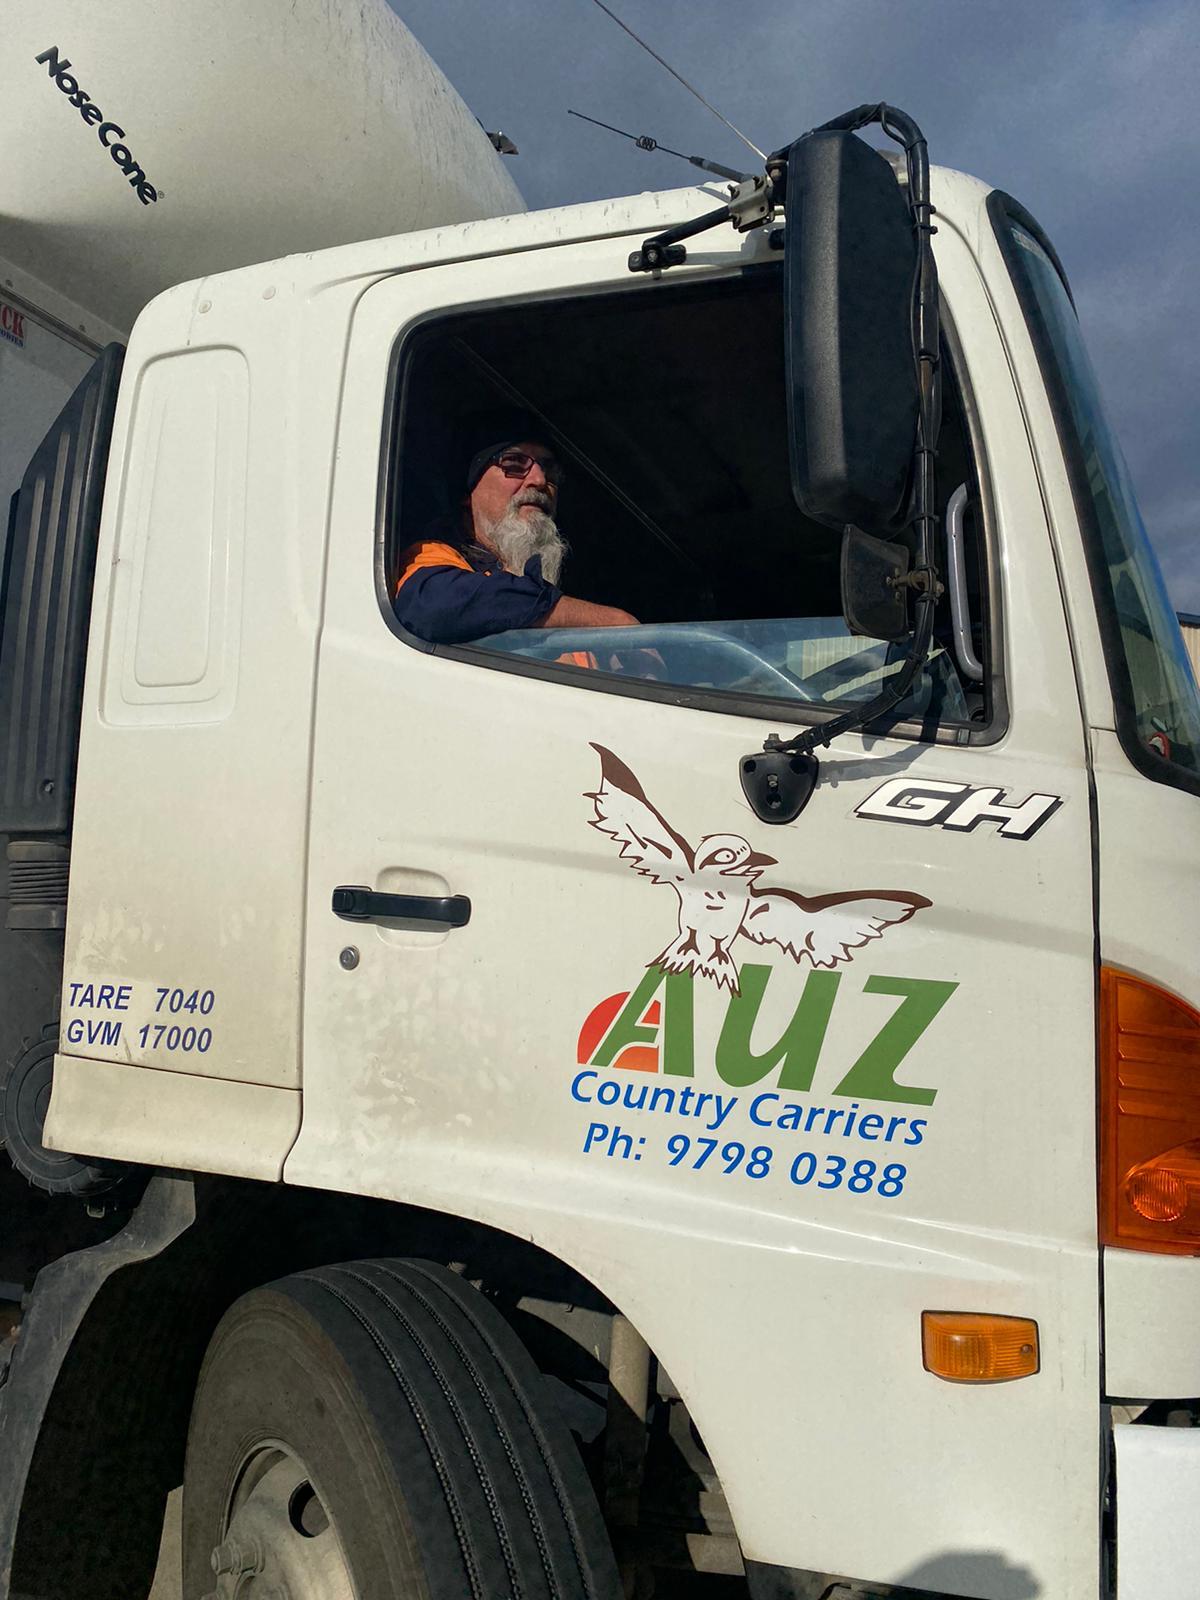 Images Auz Country Carriers